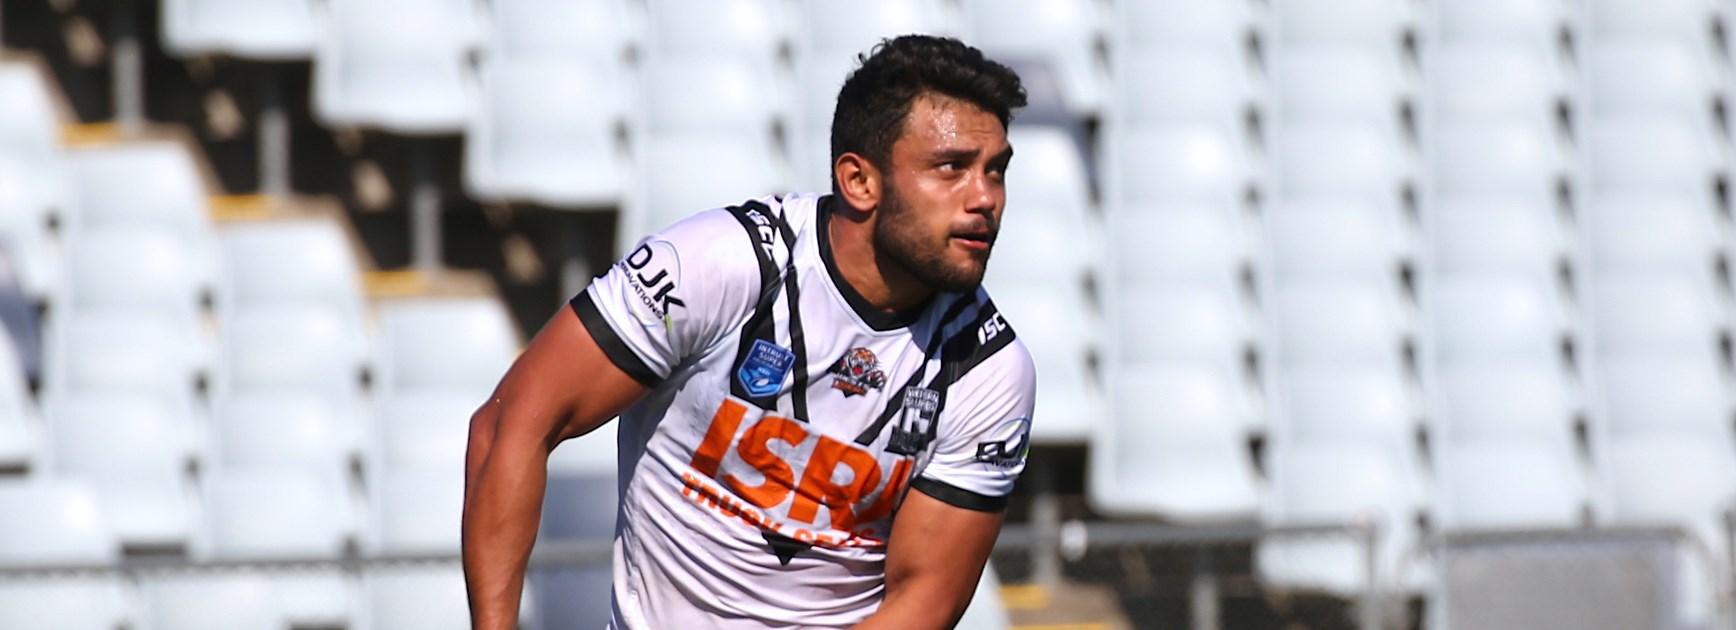 Nofoaluma 'At Home' in Magpies Colours